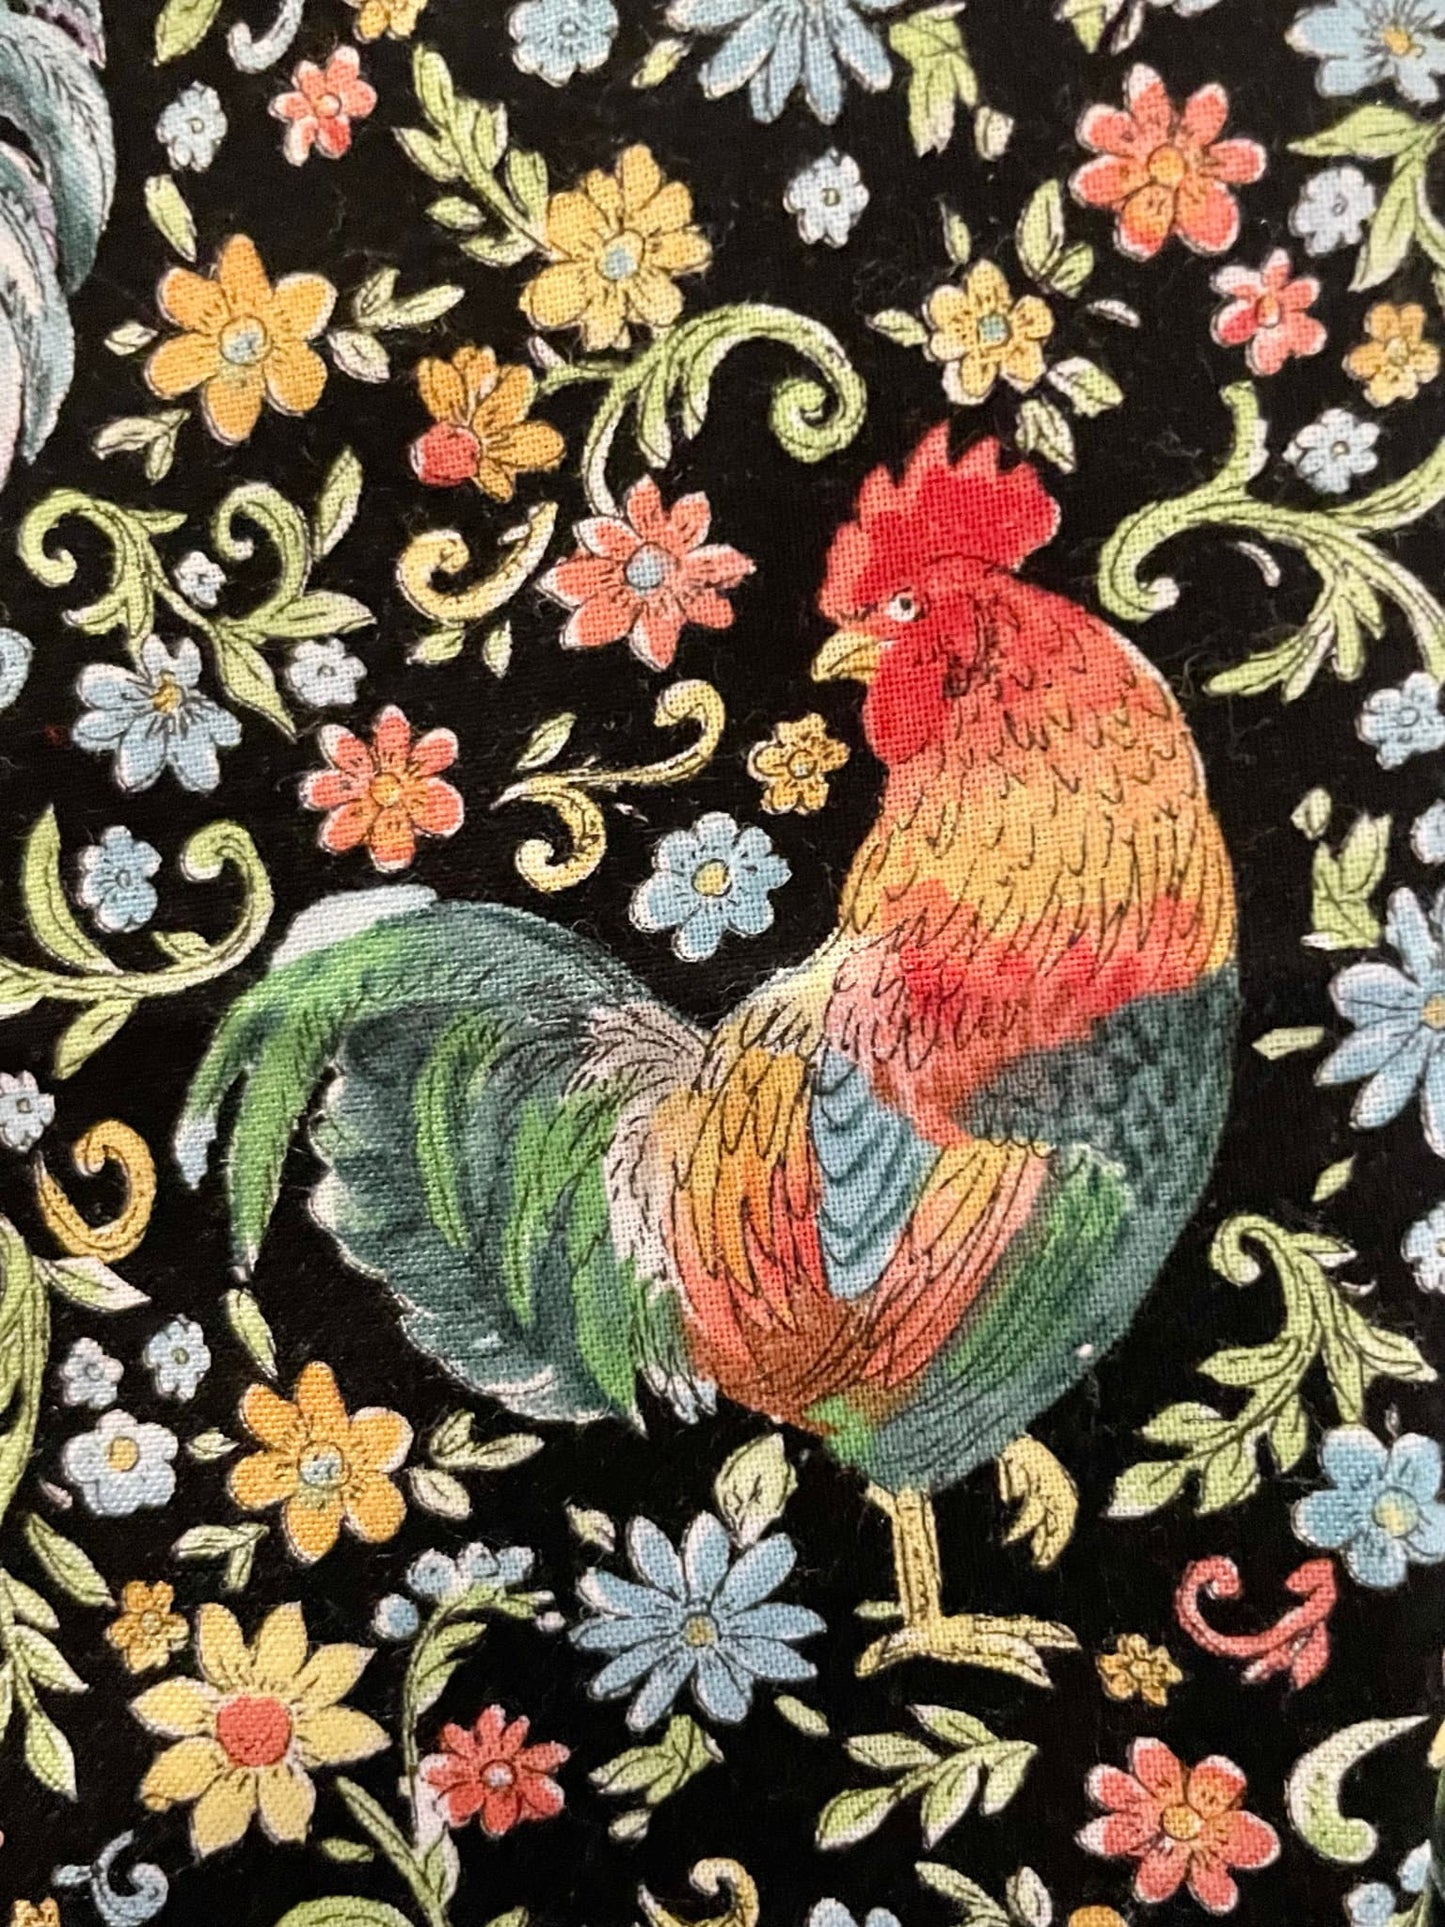 Colorful roosters and chickens blanket and decor